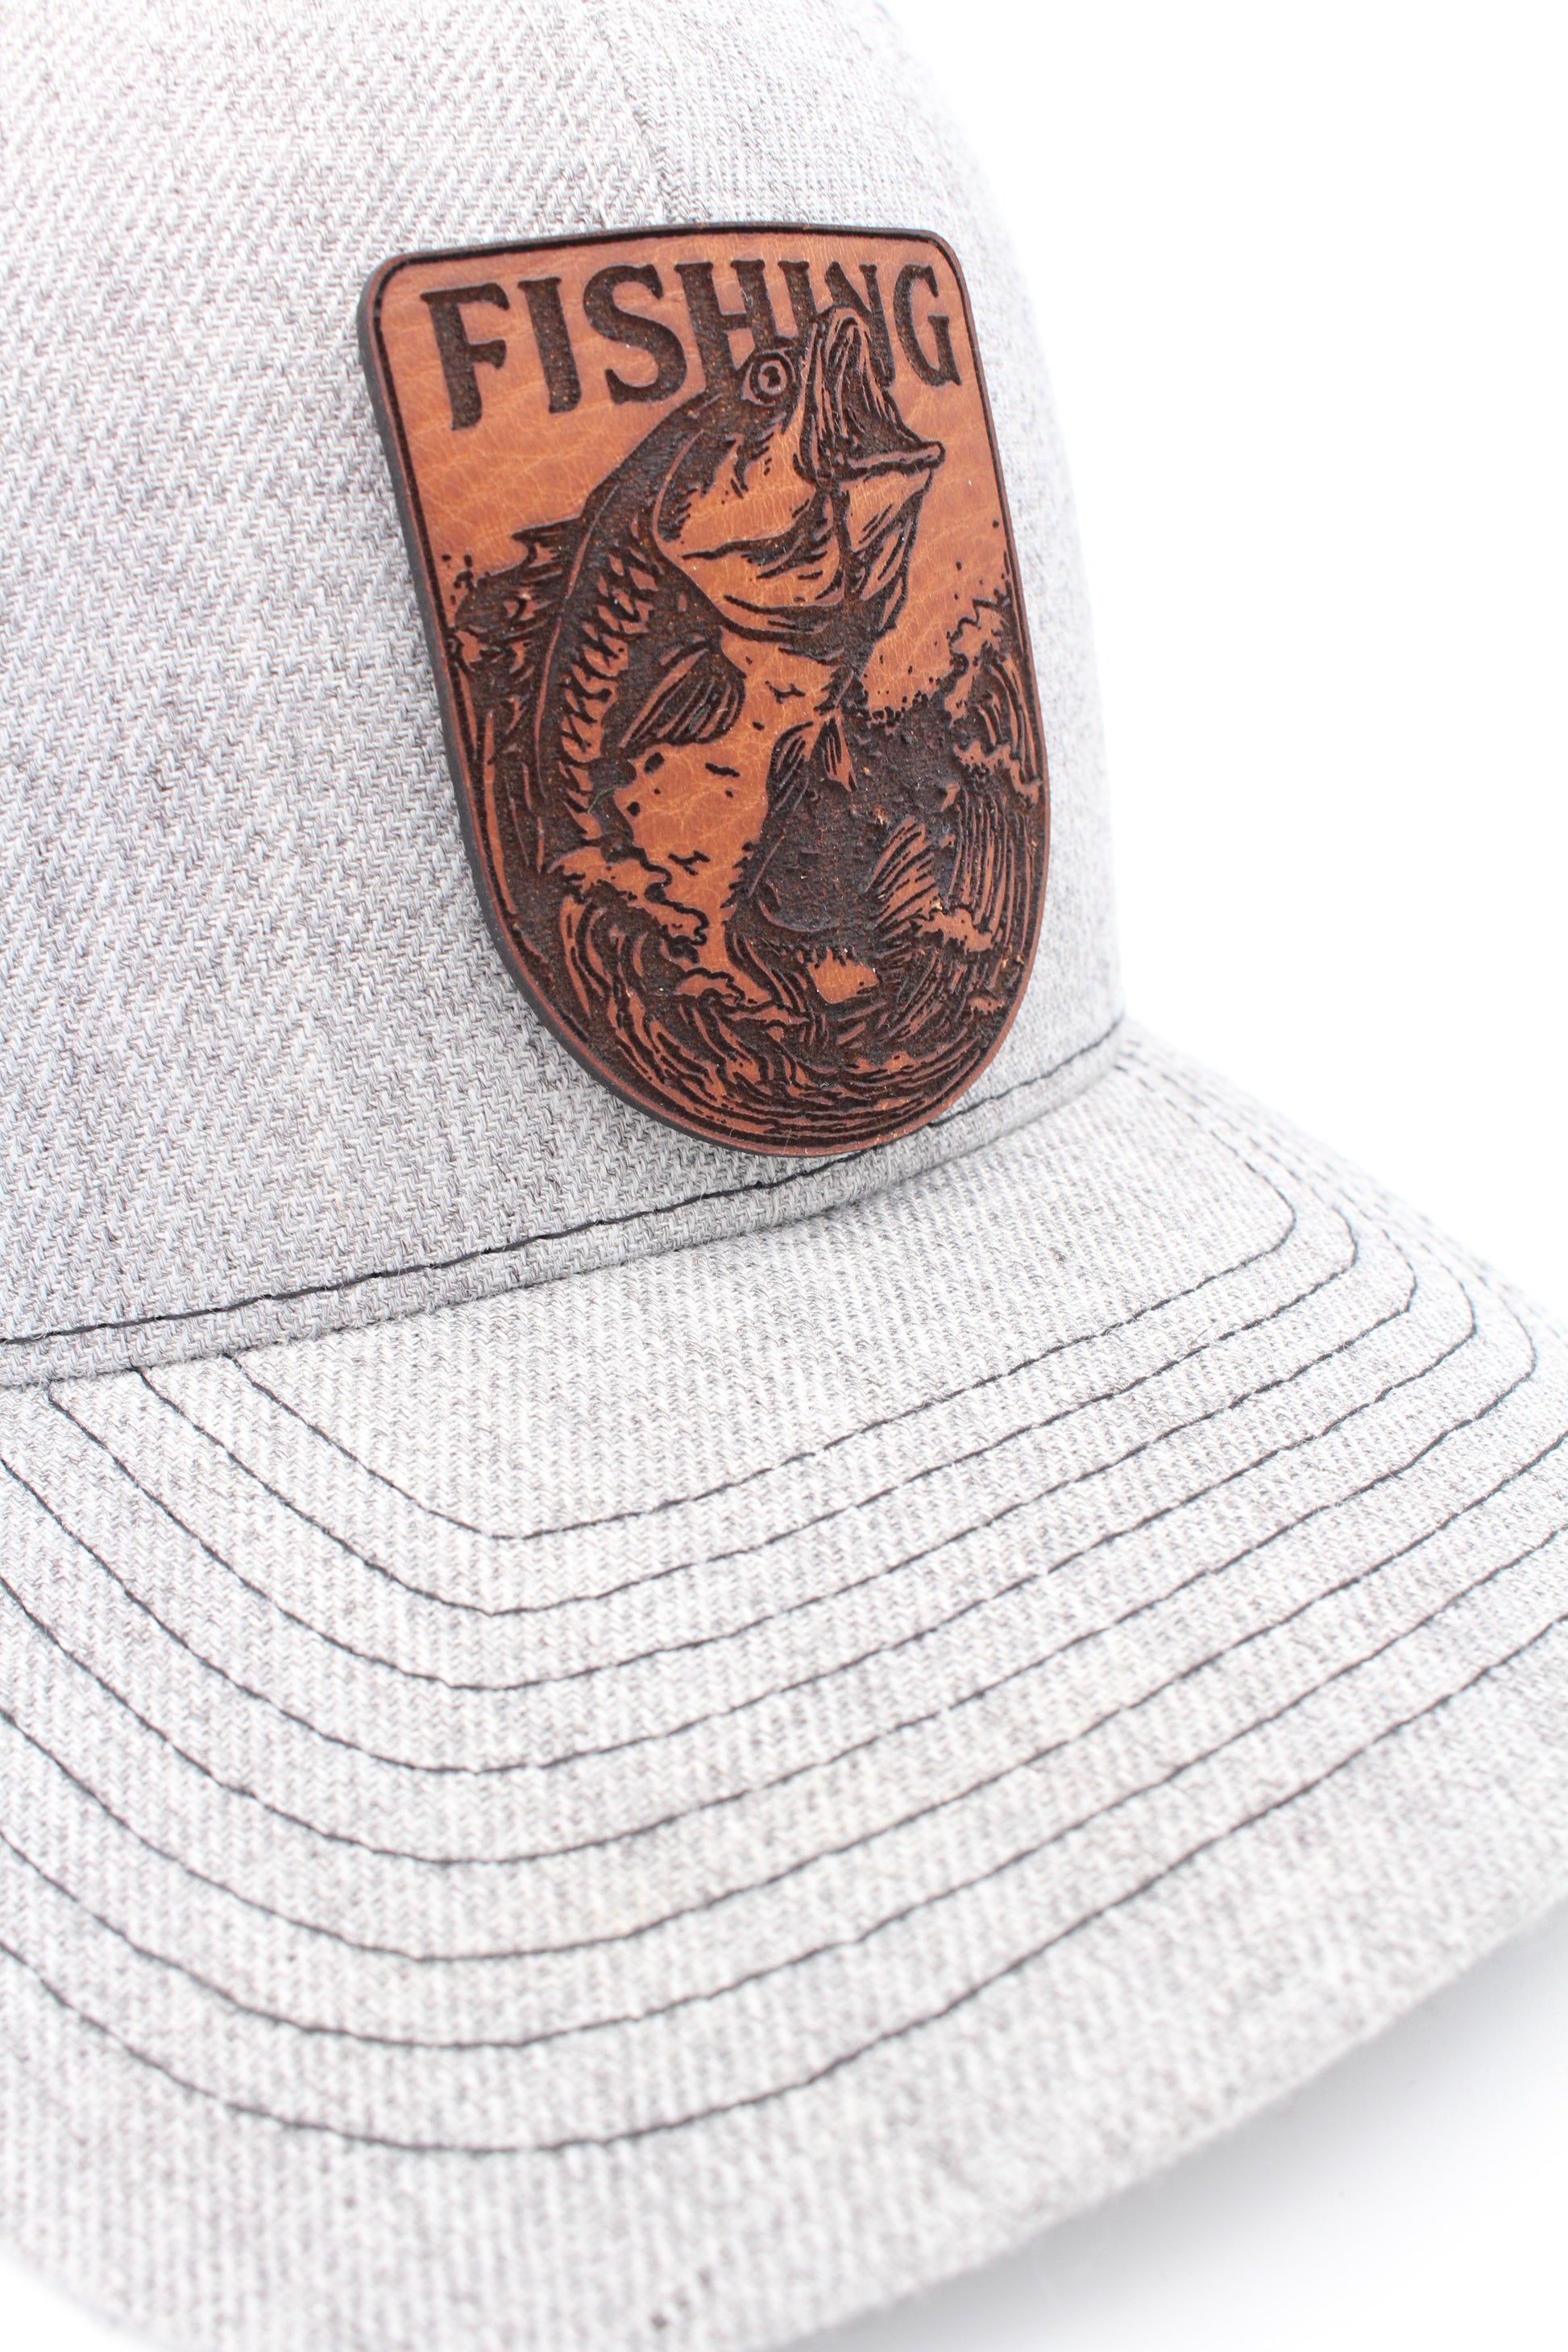 Leather Patch Trucker Style Hat - Fish Stamp Charcoal / Cafe / Fish